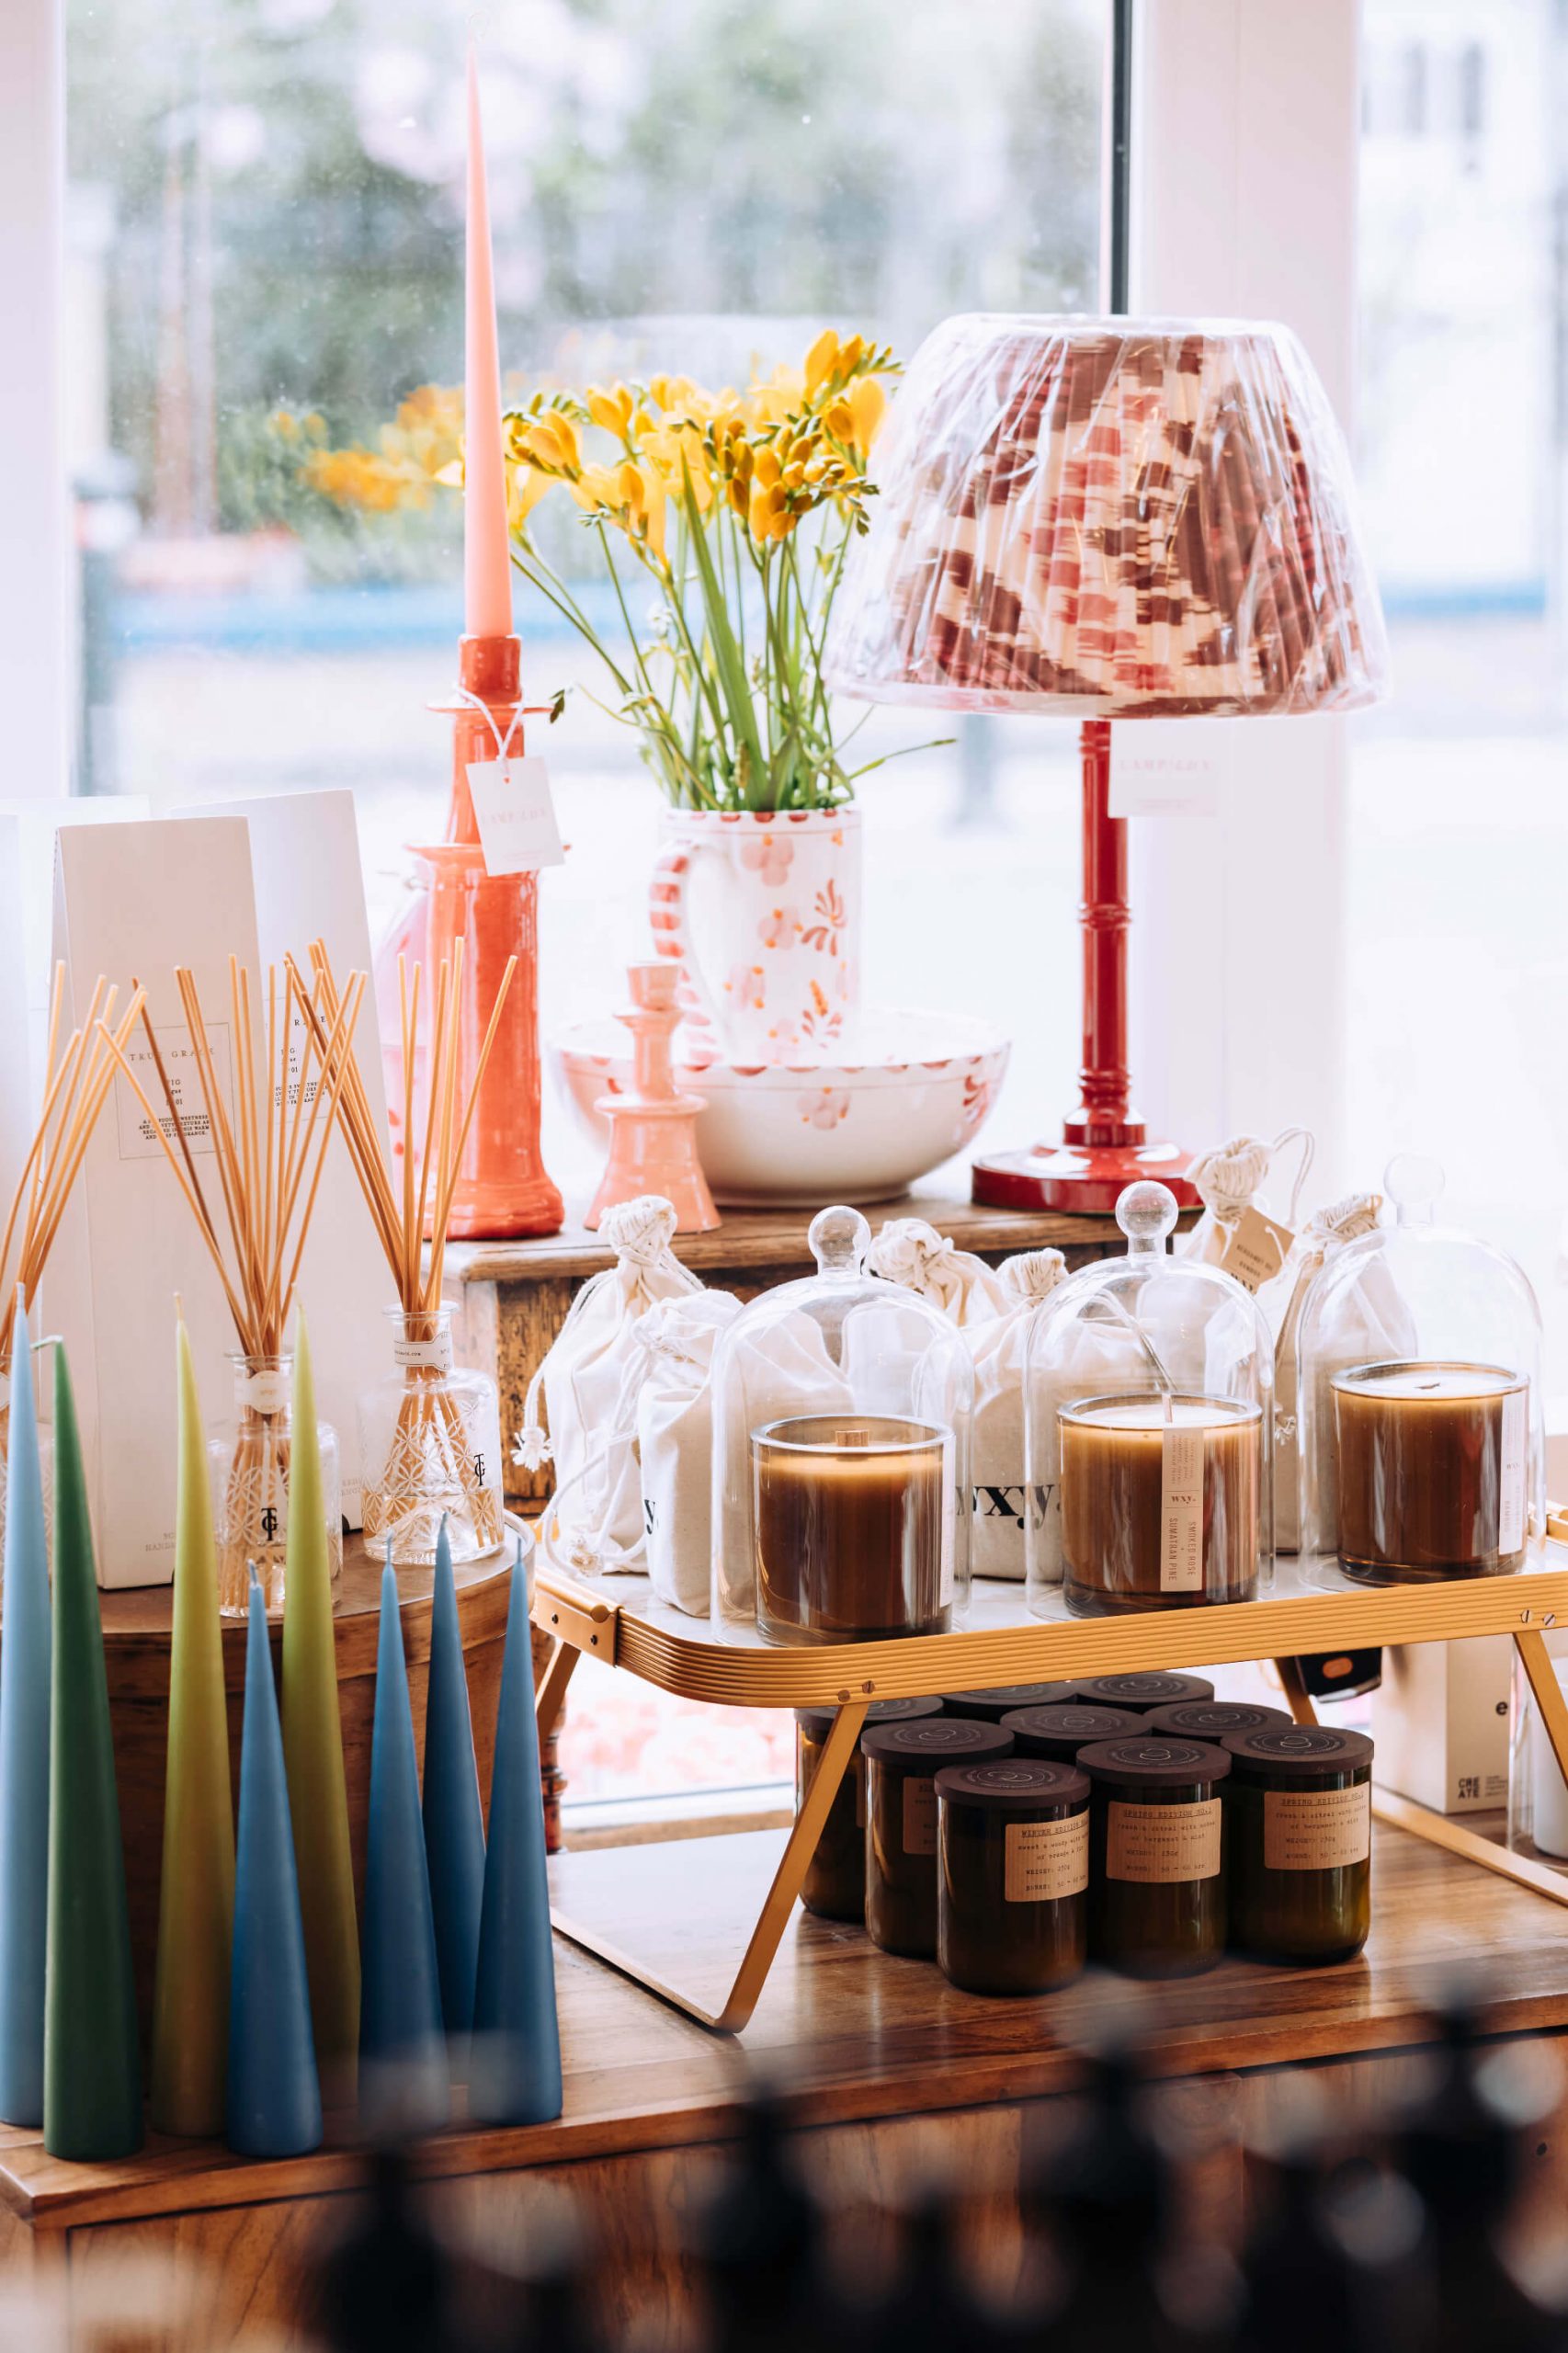 Candles, lampshades and ceramics inside LAMP LDN Peckham - an independent London homewares store